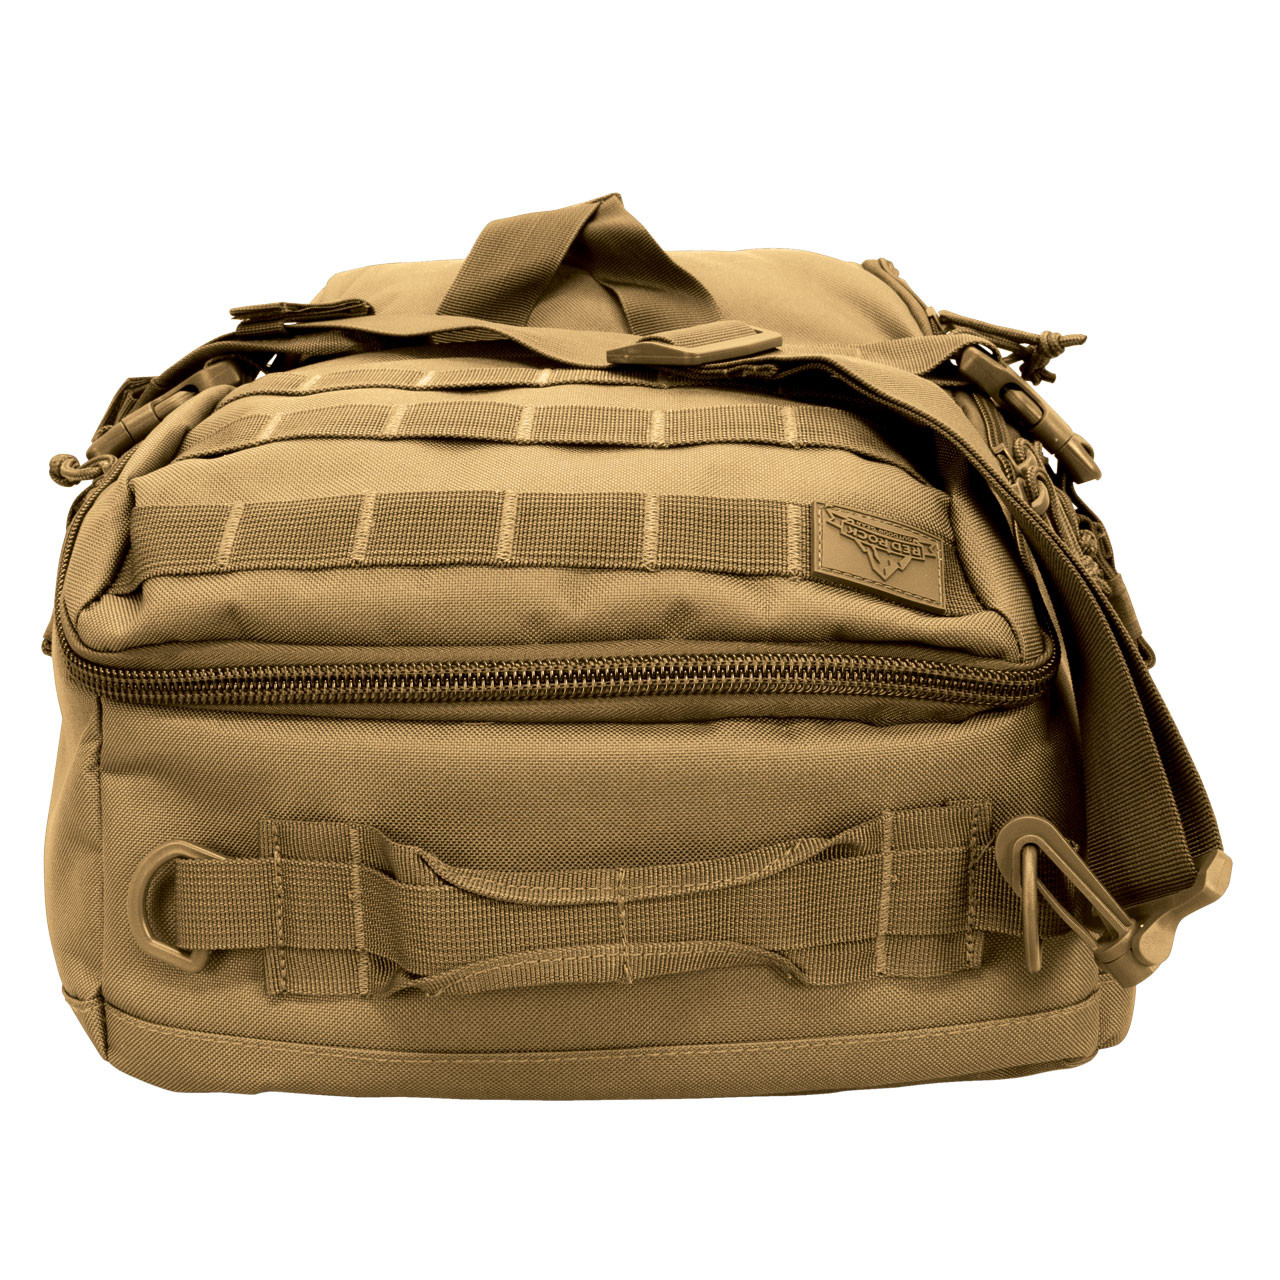 Traveler Duffle Pack - Coyote - End
